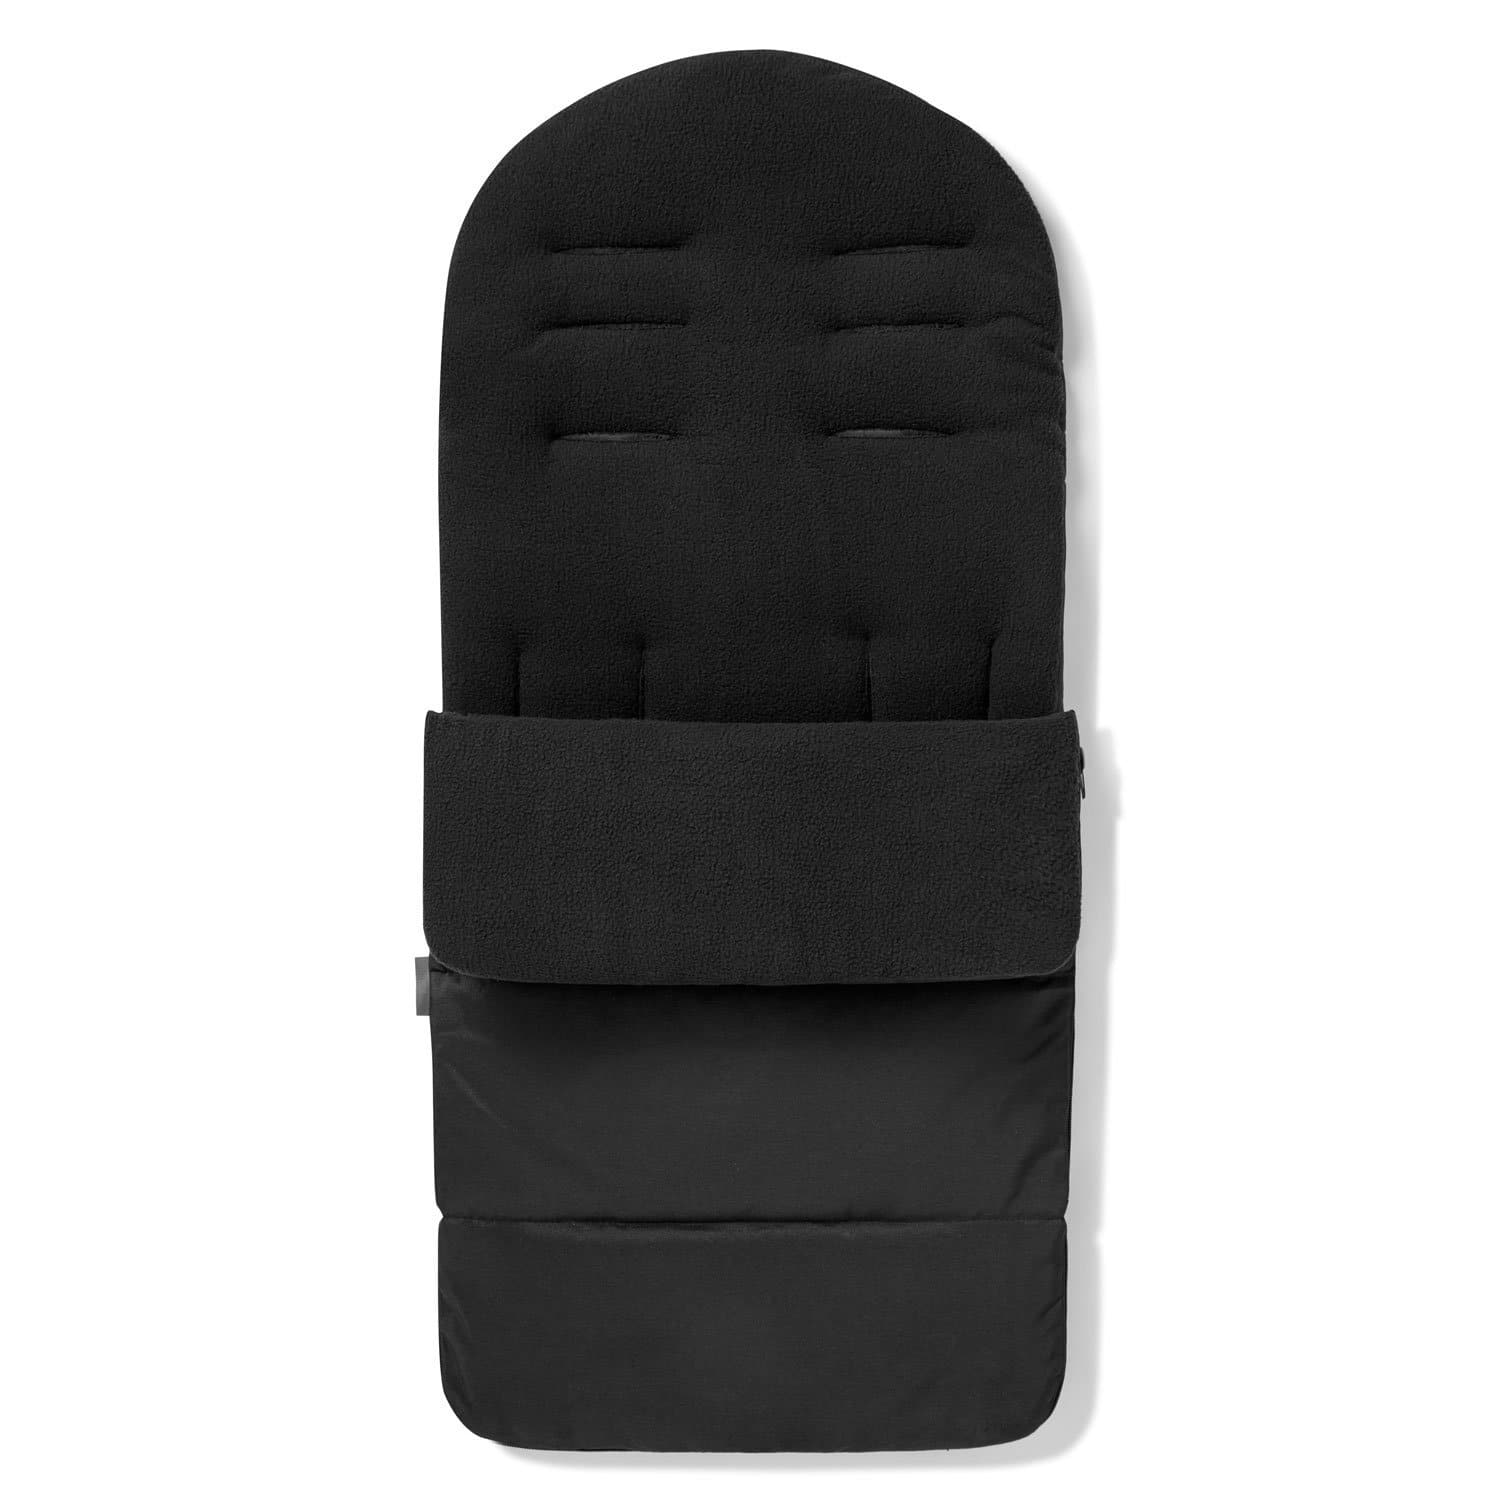 Premium Footmuff / Cosy Toes Compatible with Bumbleride - For Your Little One